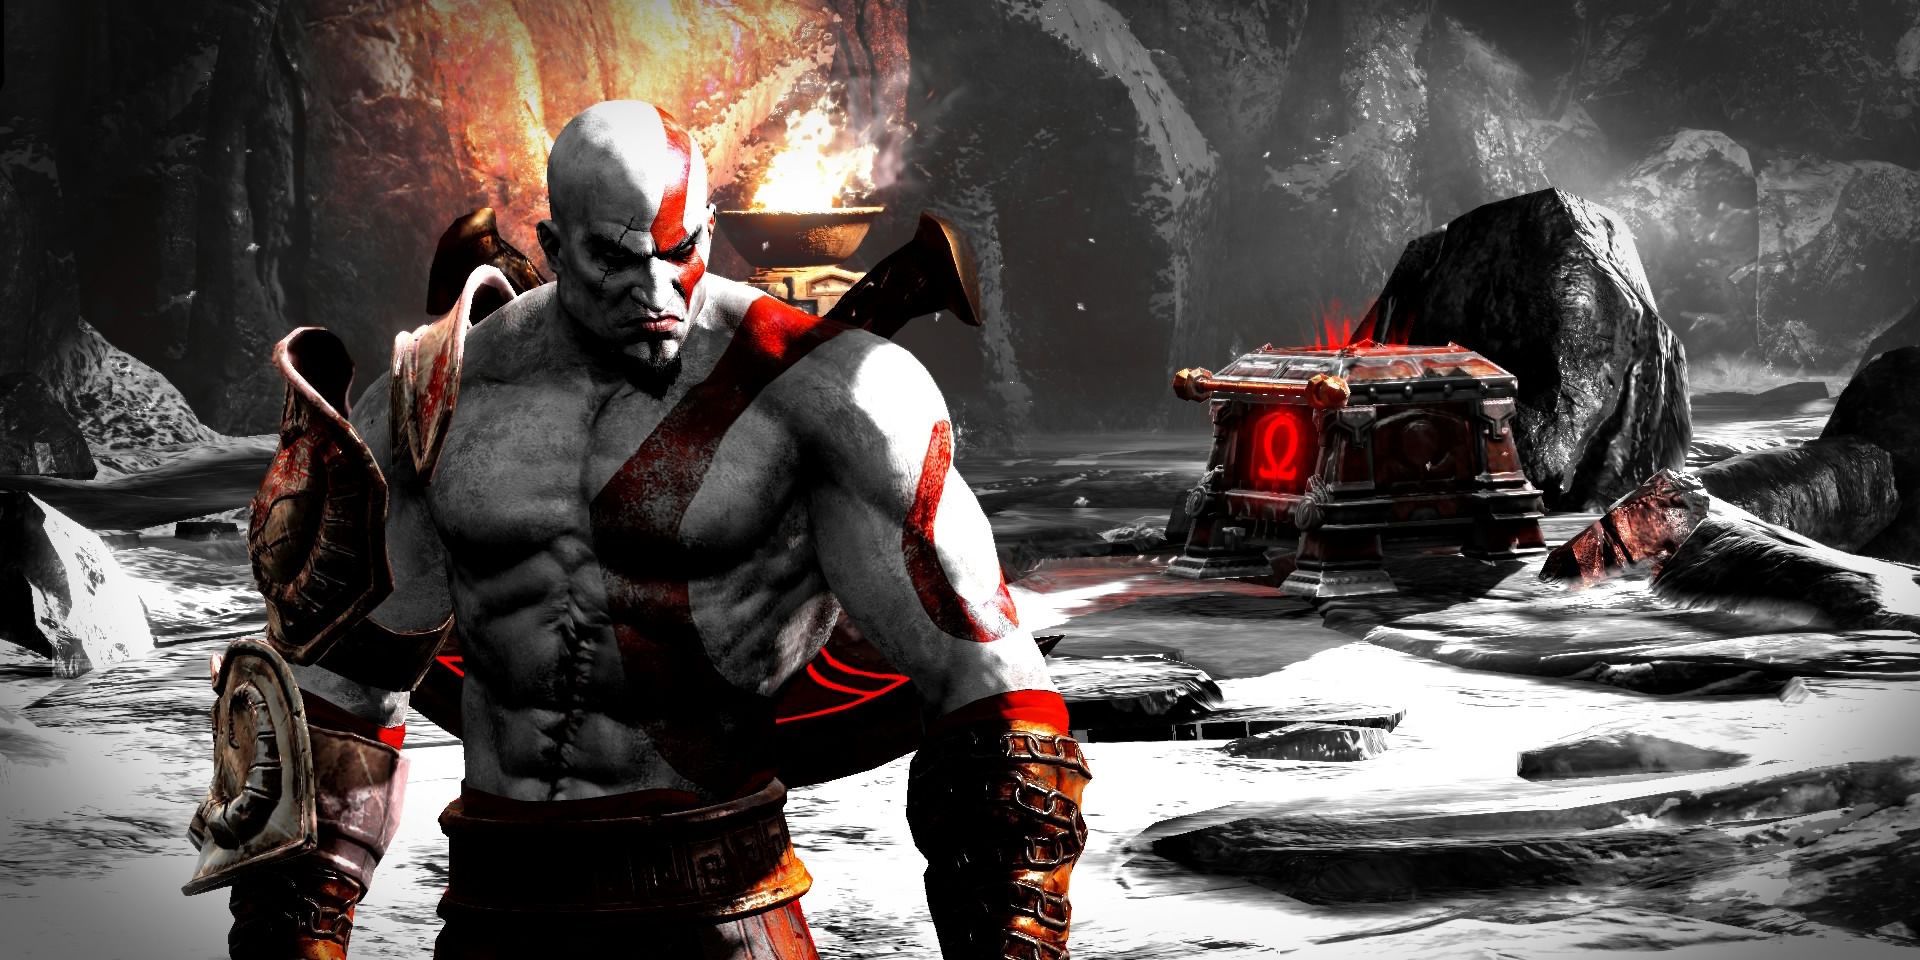 Kratos in God of War 3 is standing in front of a treasure chest